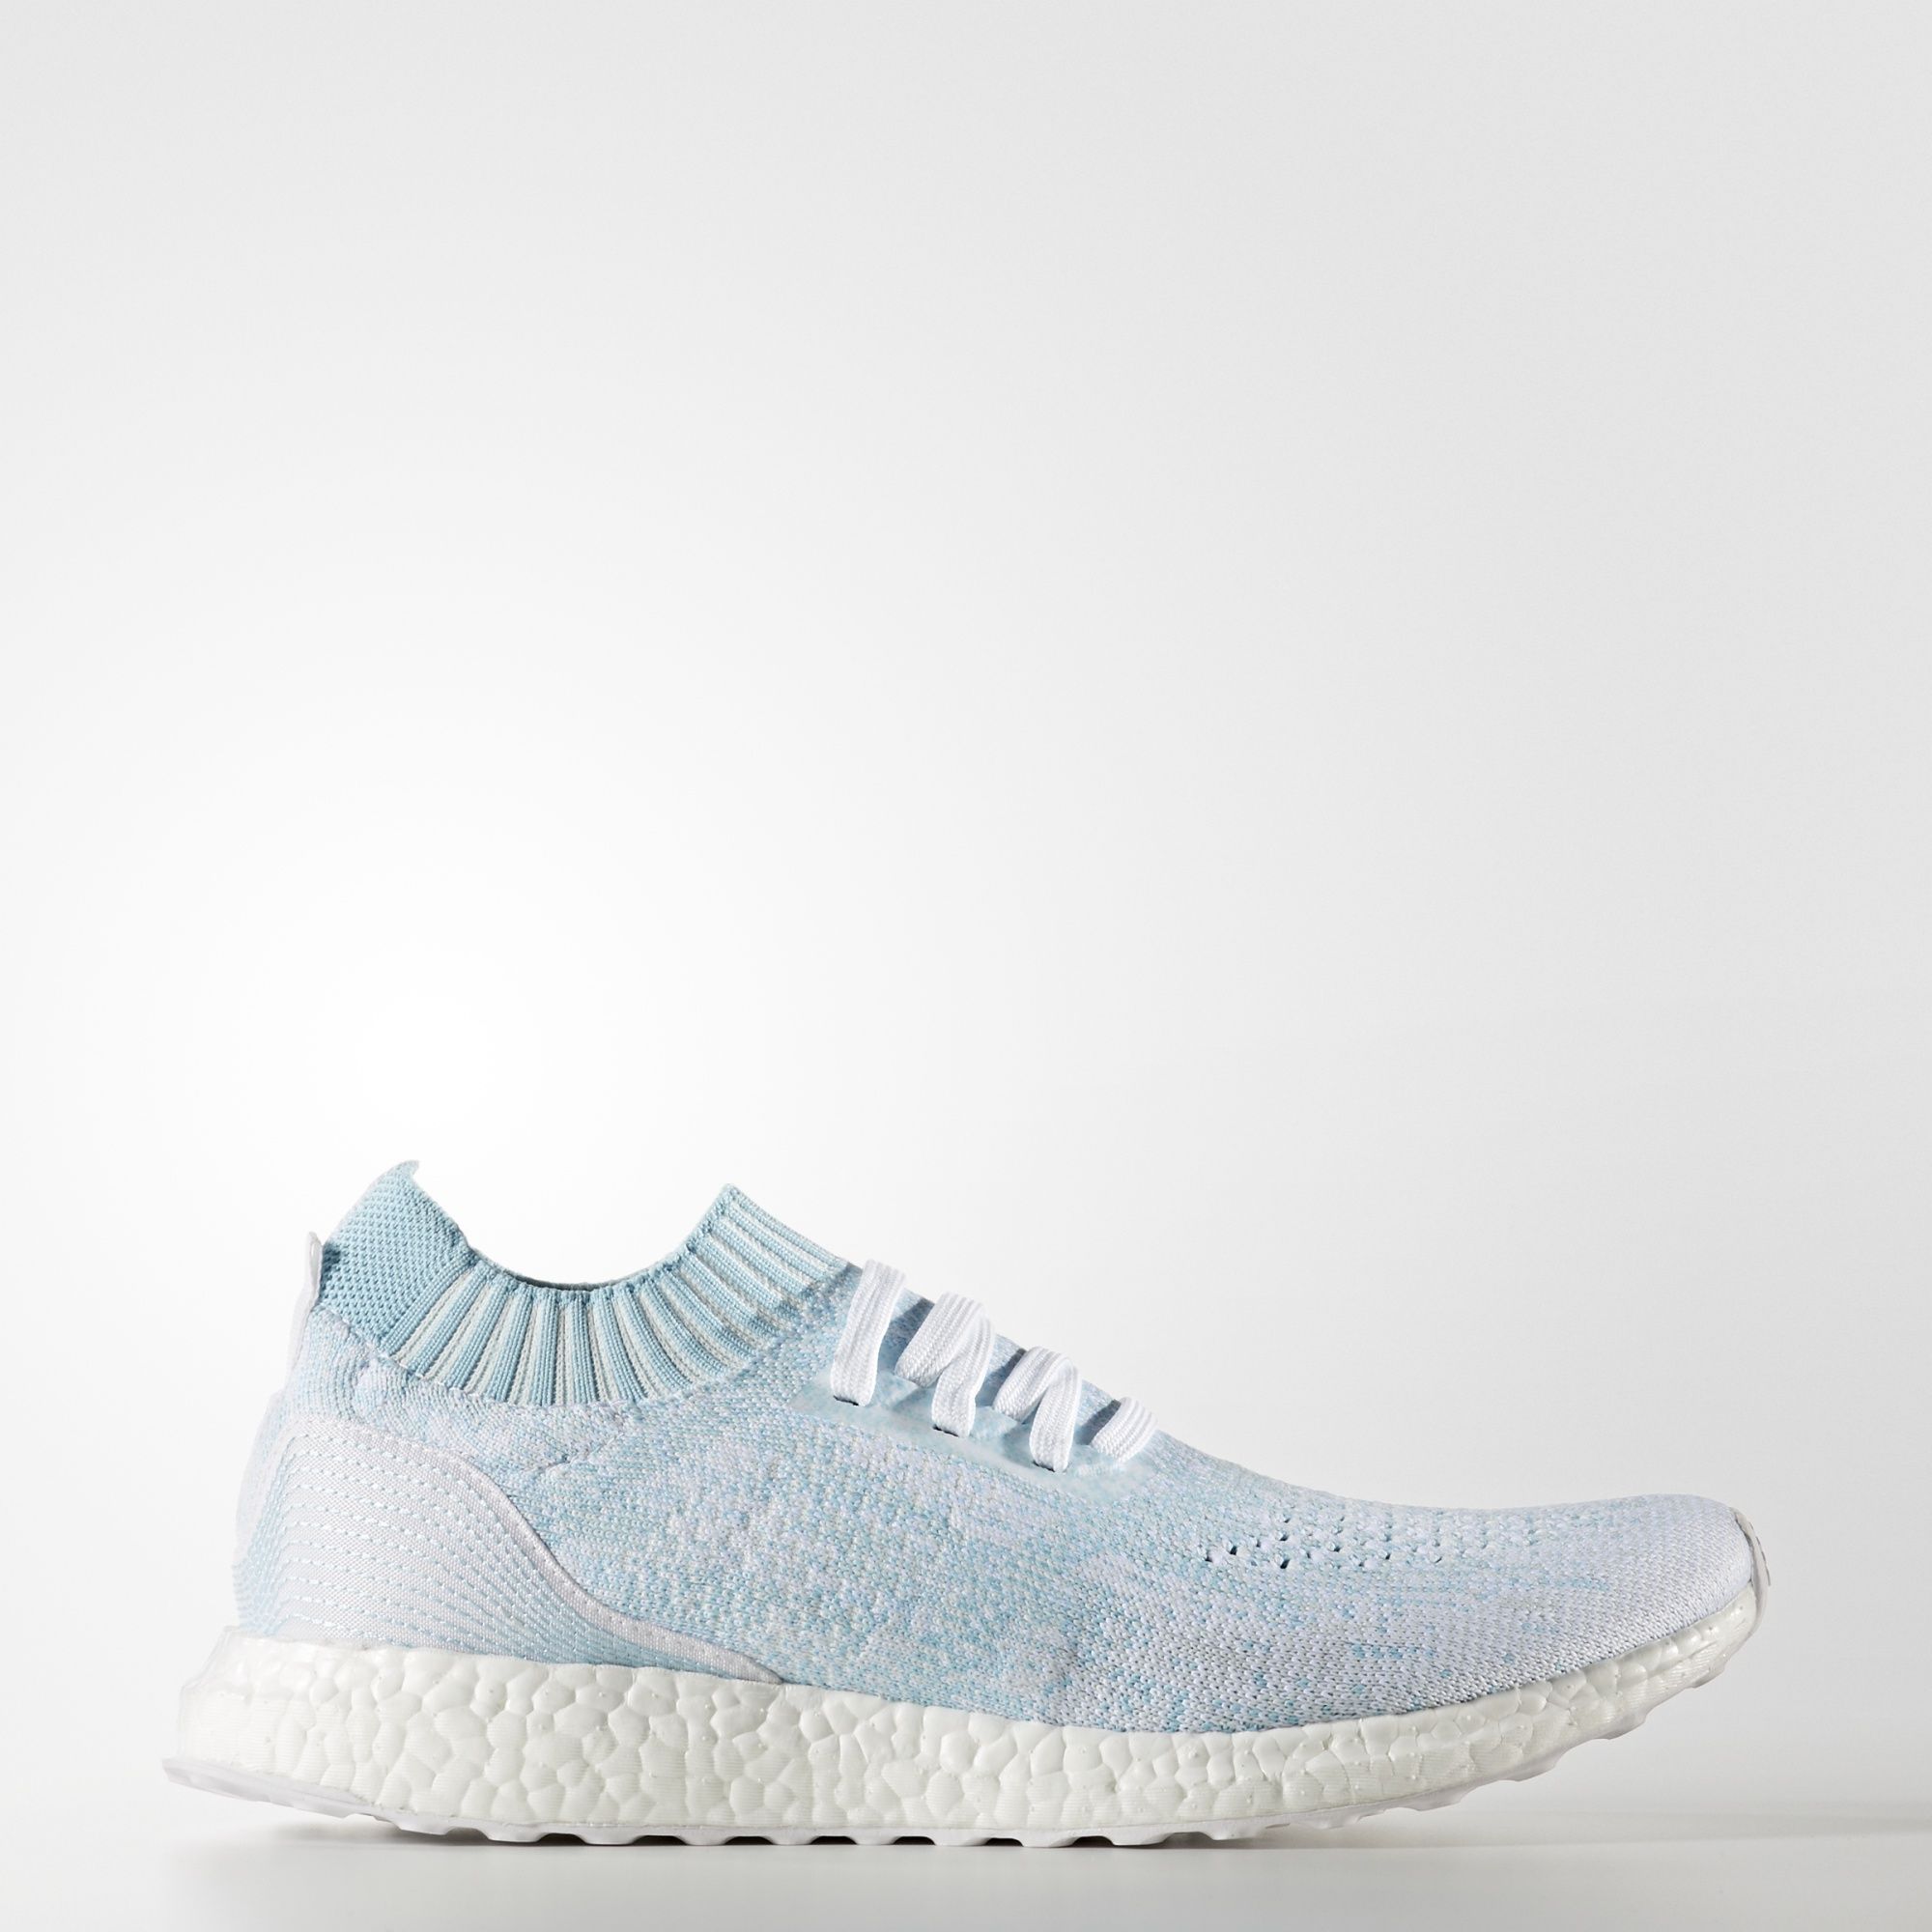 adidas-ultra-boost-uncaged-parley-icey-blue-2